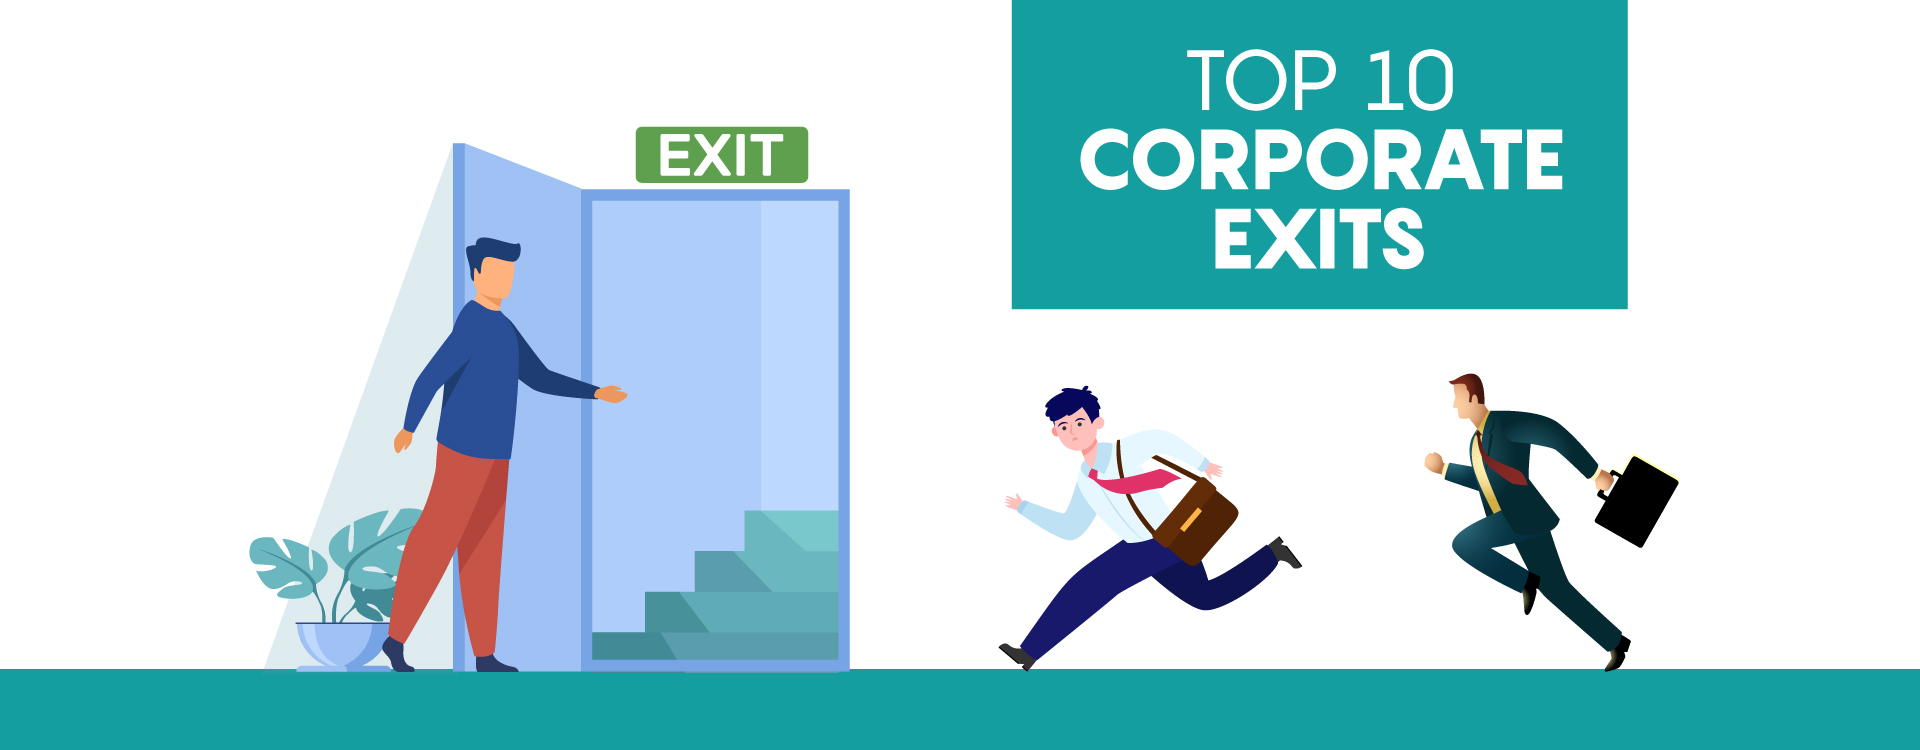 Evolution of exit scene in India. Top 10 corporate exits of 2020.